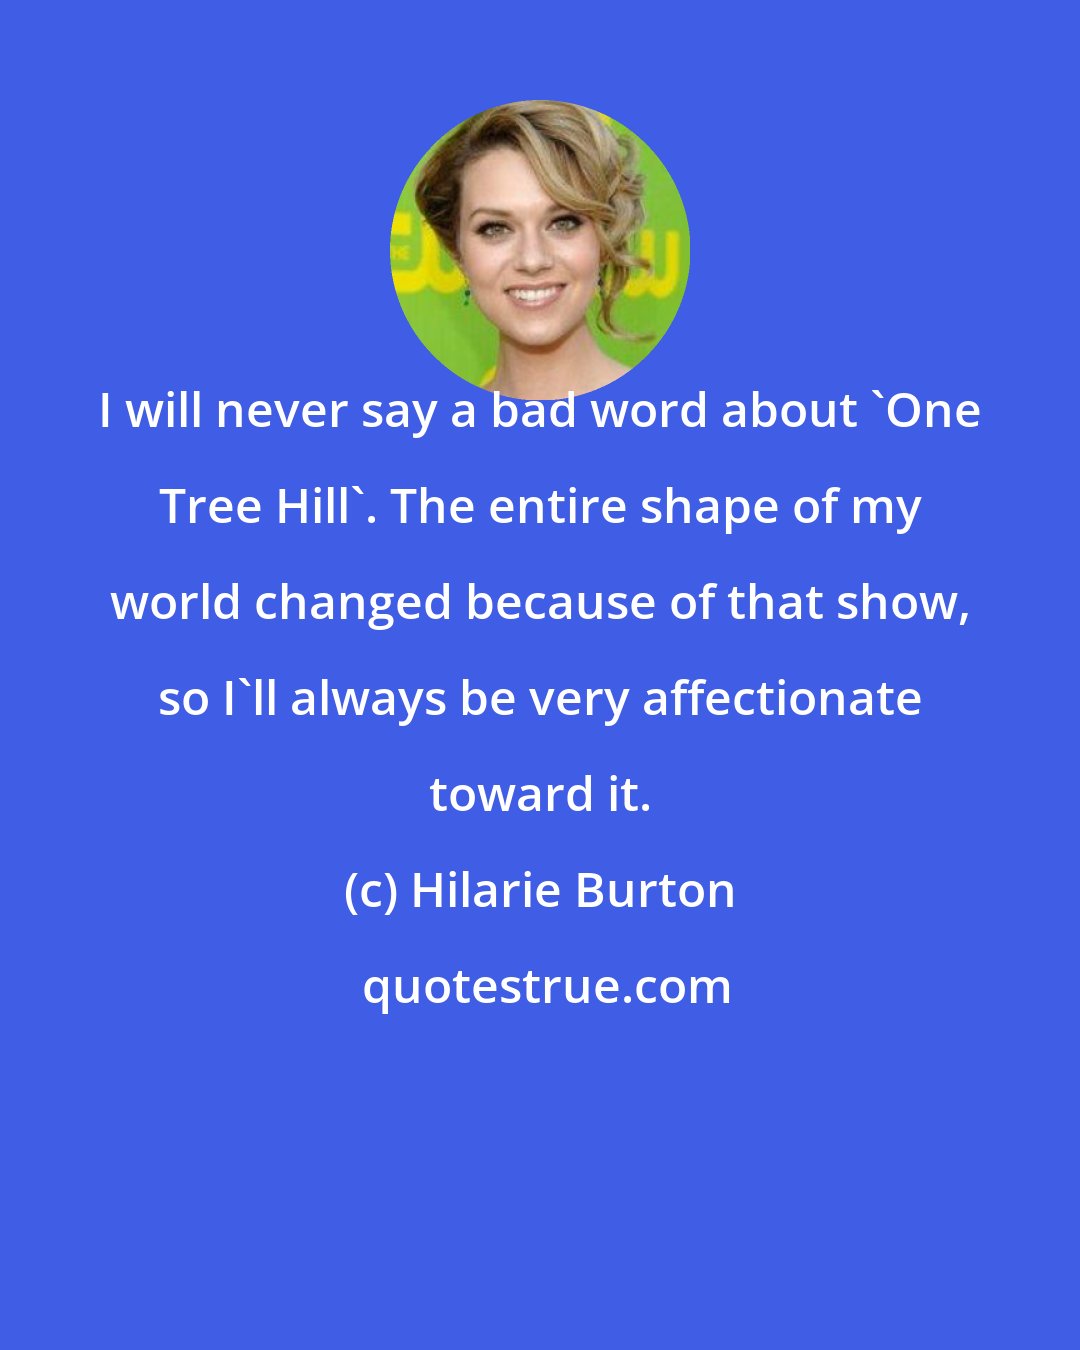 Hilarie Burton: I will never say a bad word about 'One Tree Hill'. The entire shape of my world changed because of that show, so I'll always be very affectionate toward it.